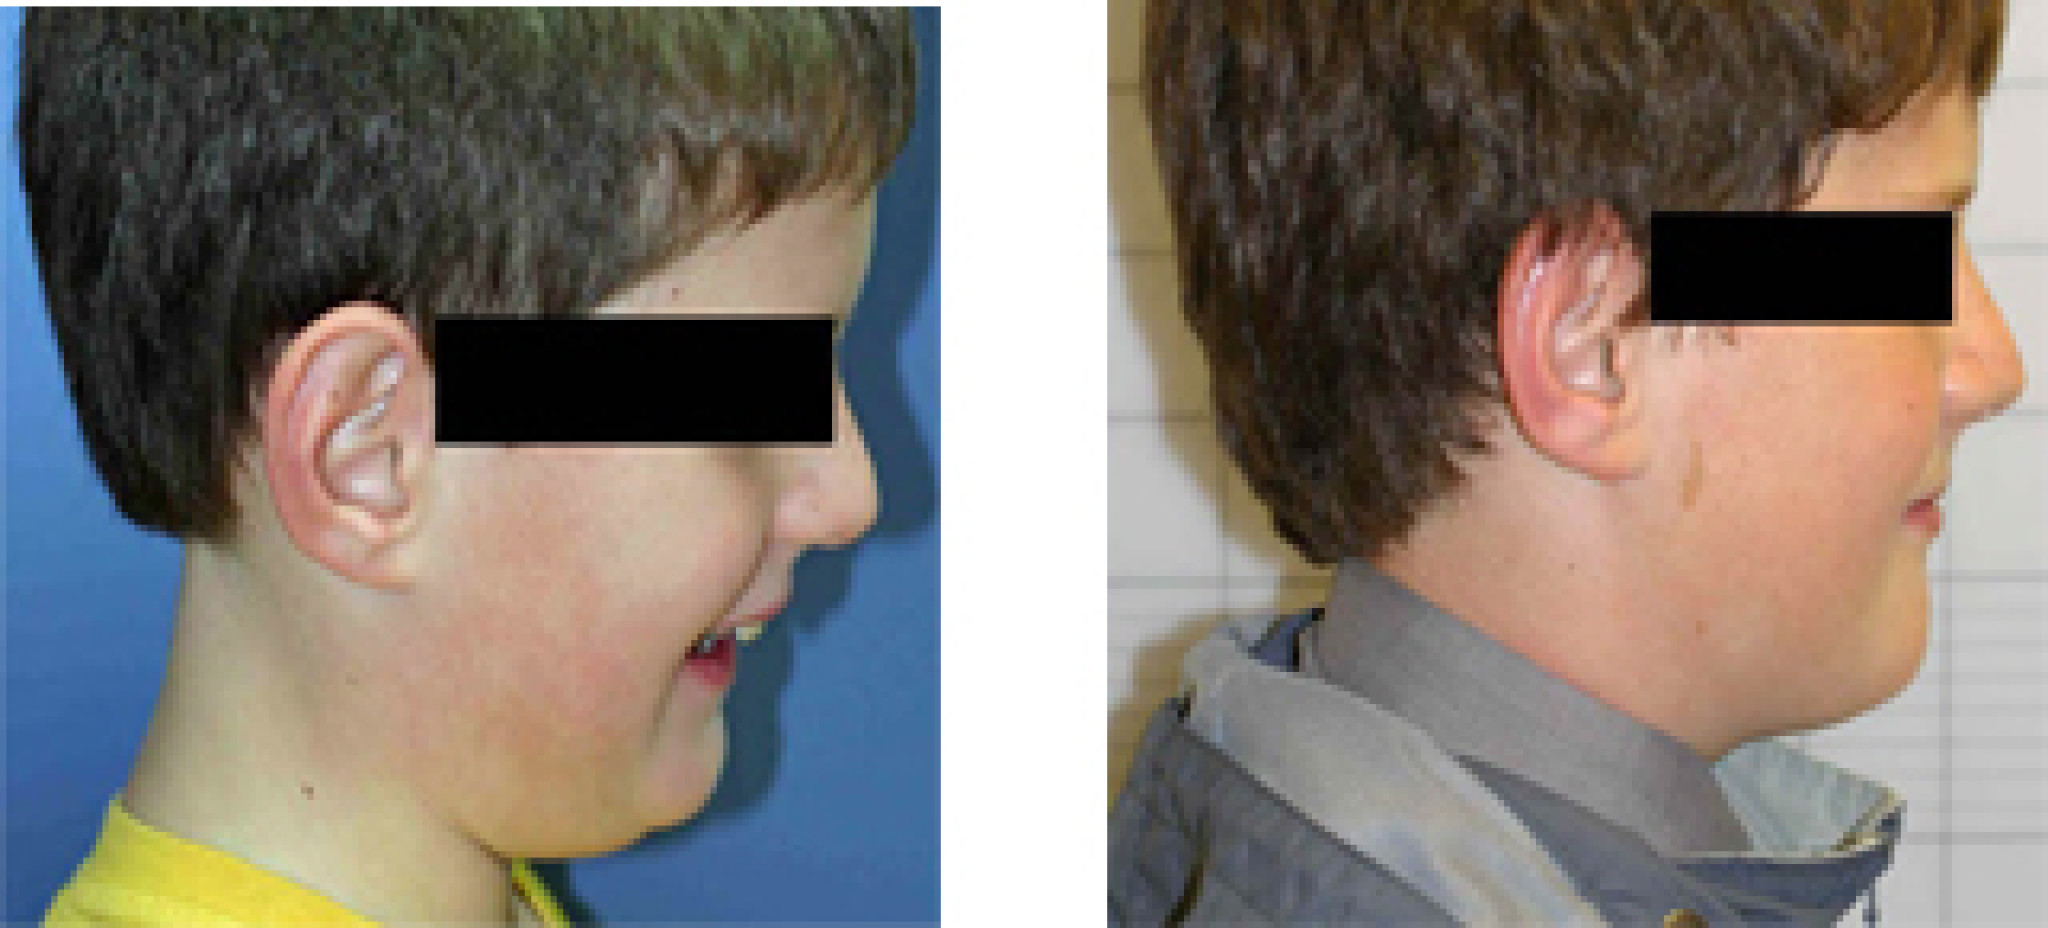 Facial profile change with appliances - child.jpg